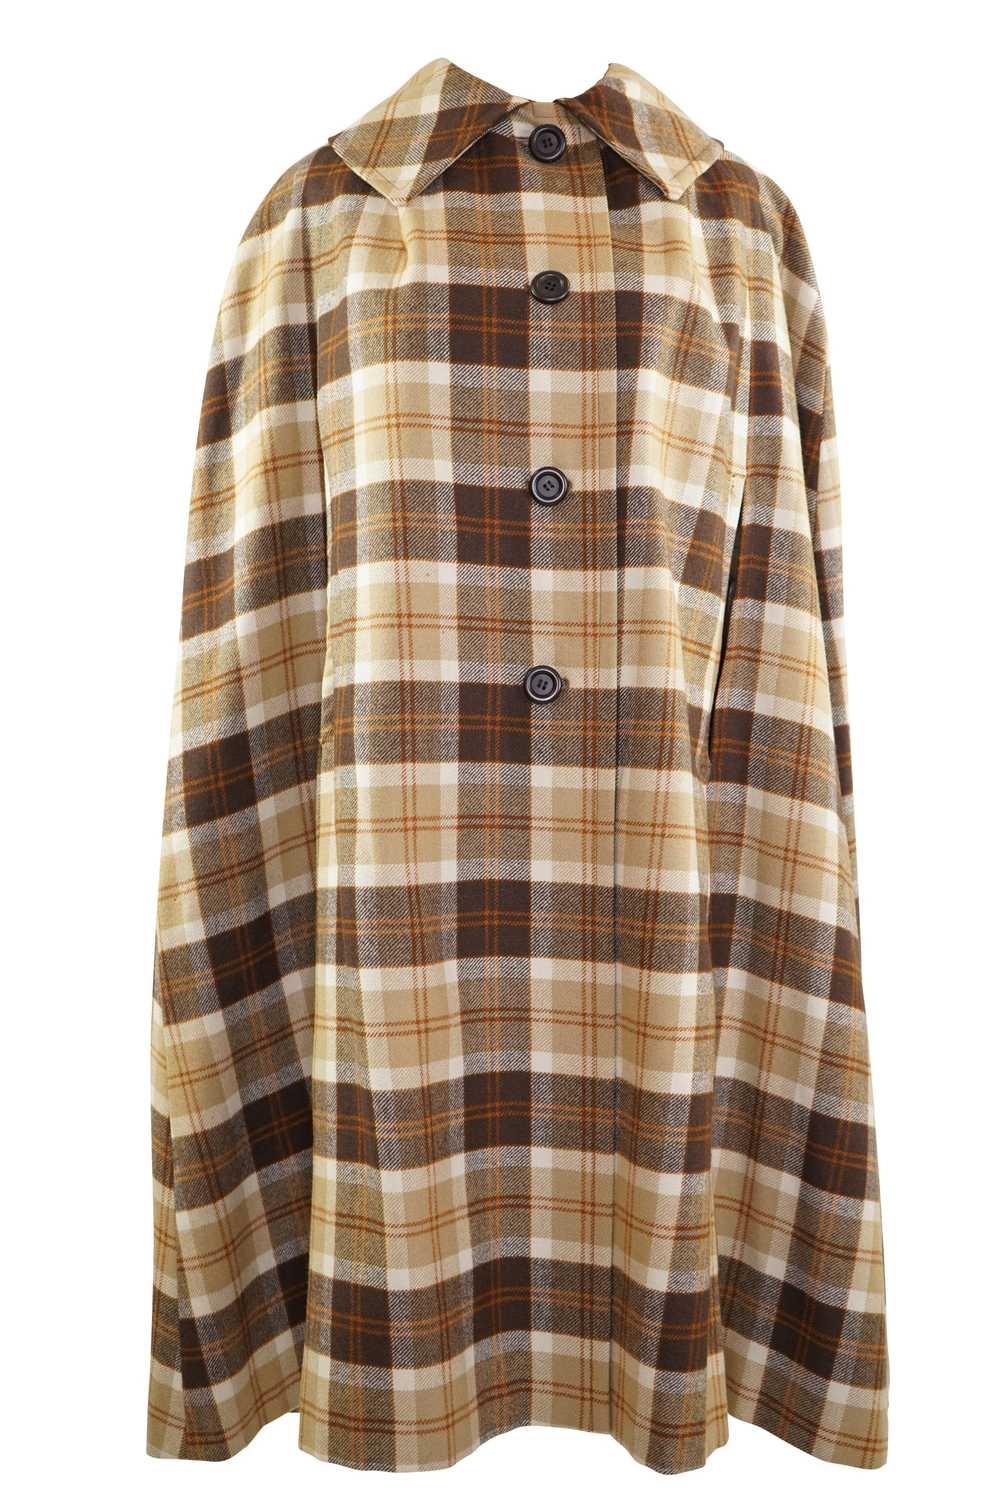 1970's Brown Wool Plaid Cape - image 1